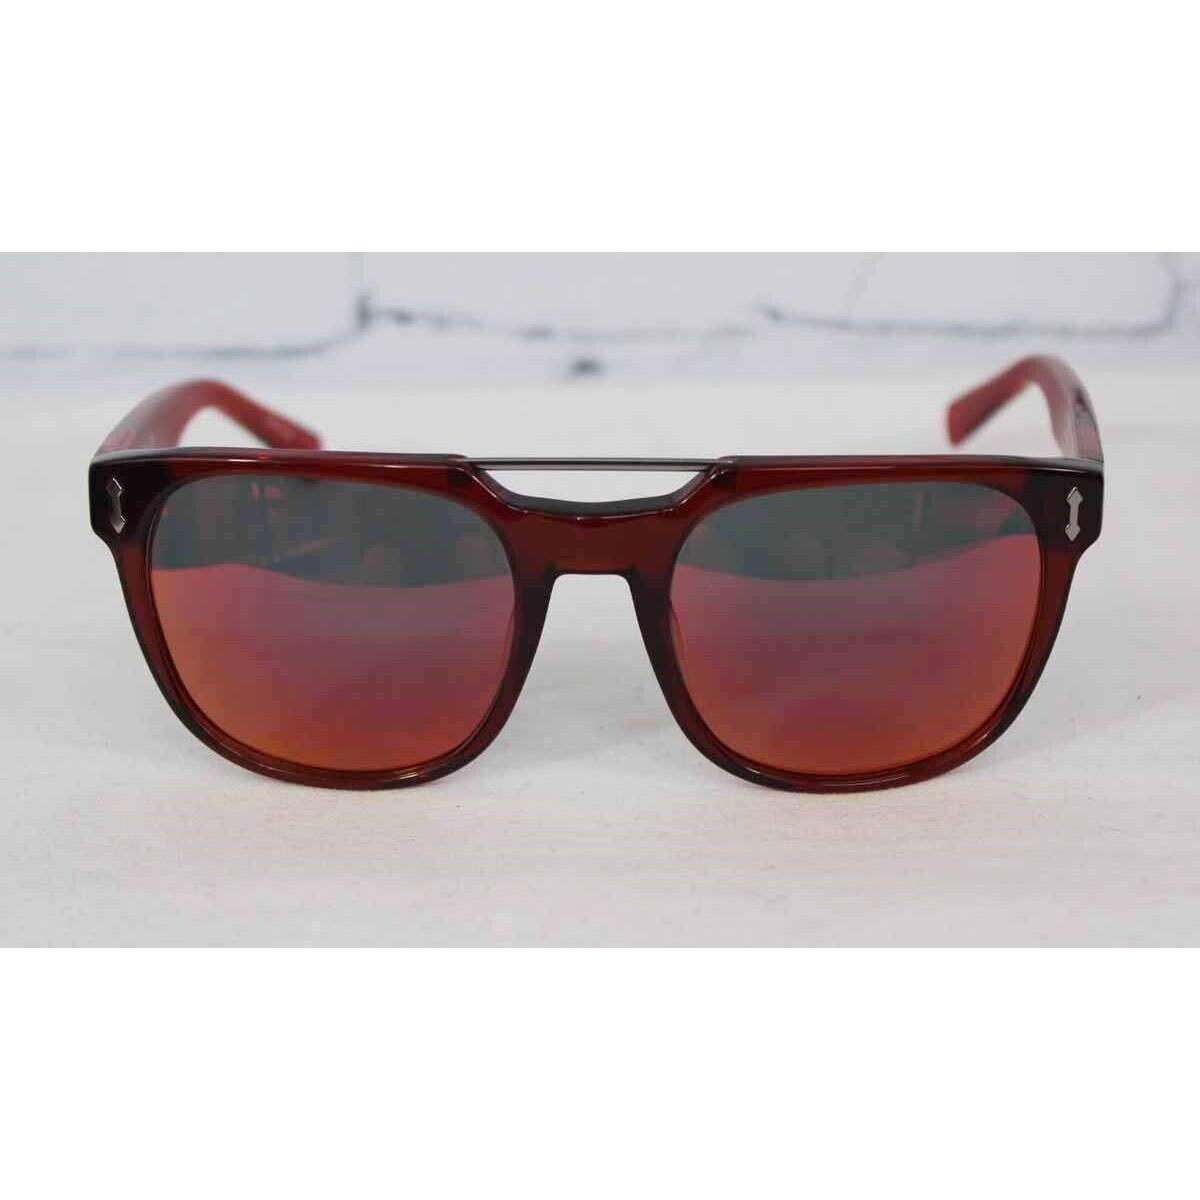 Dragon Mix Sunglasses Shiny Red Red Ion Lens